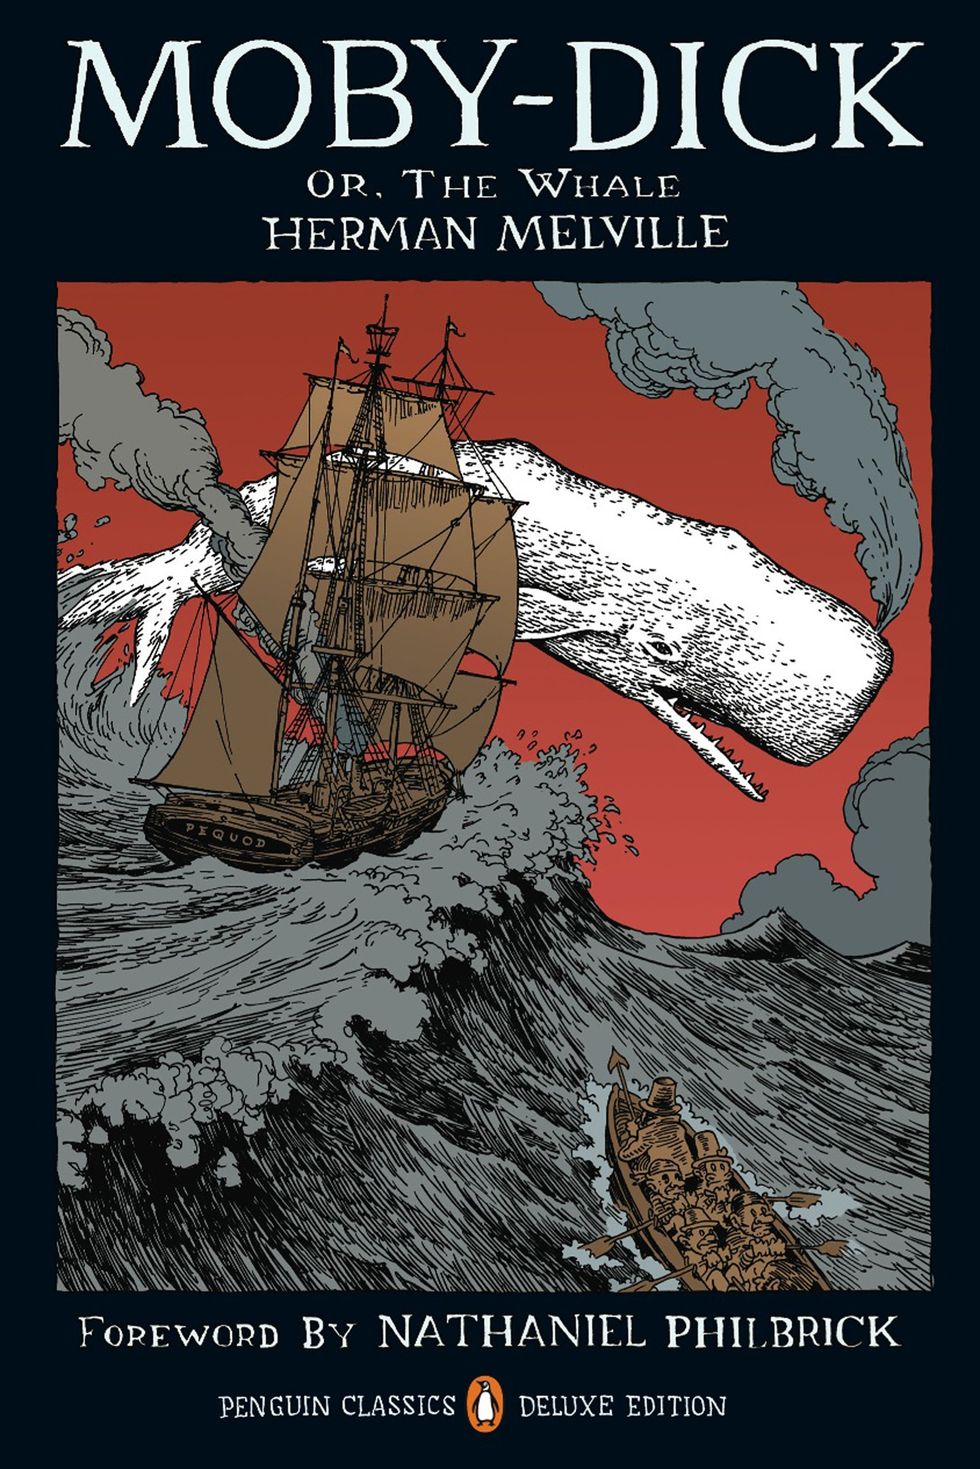 Moby-Dick Read-A-Thon